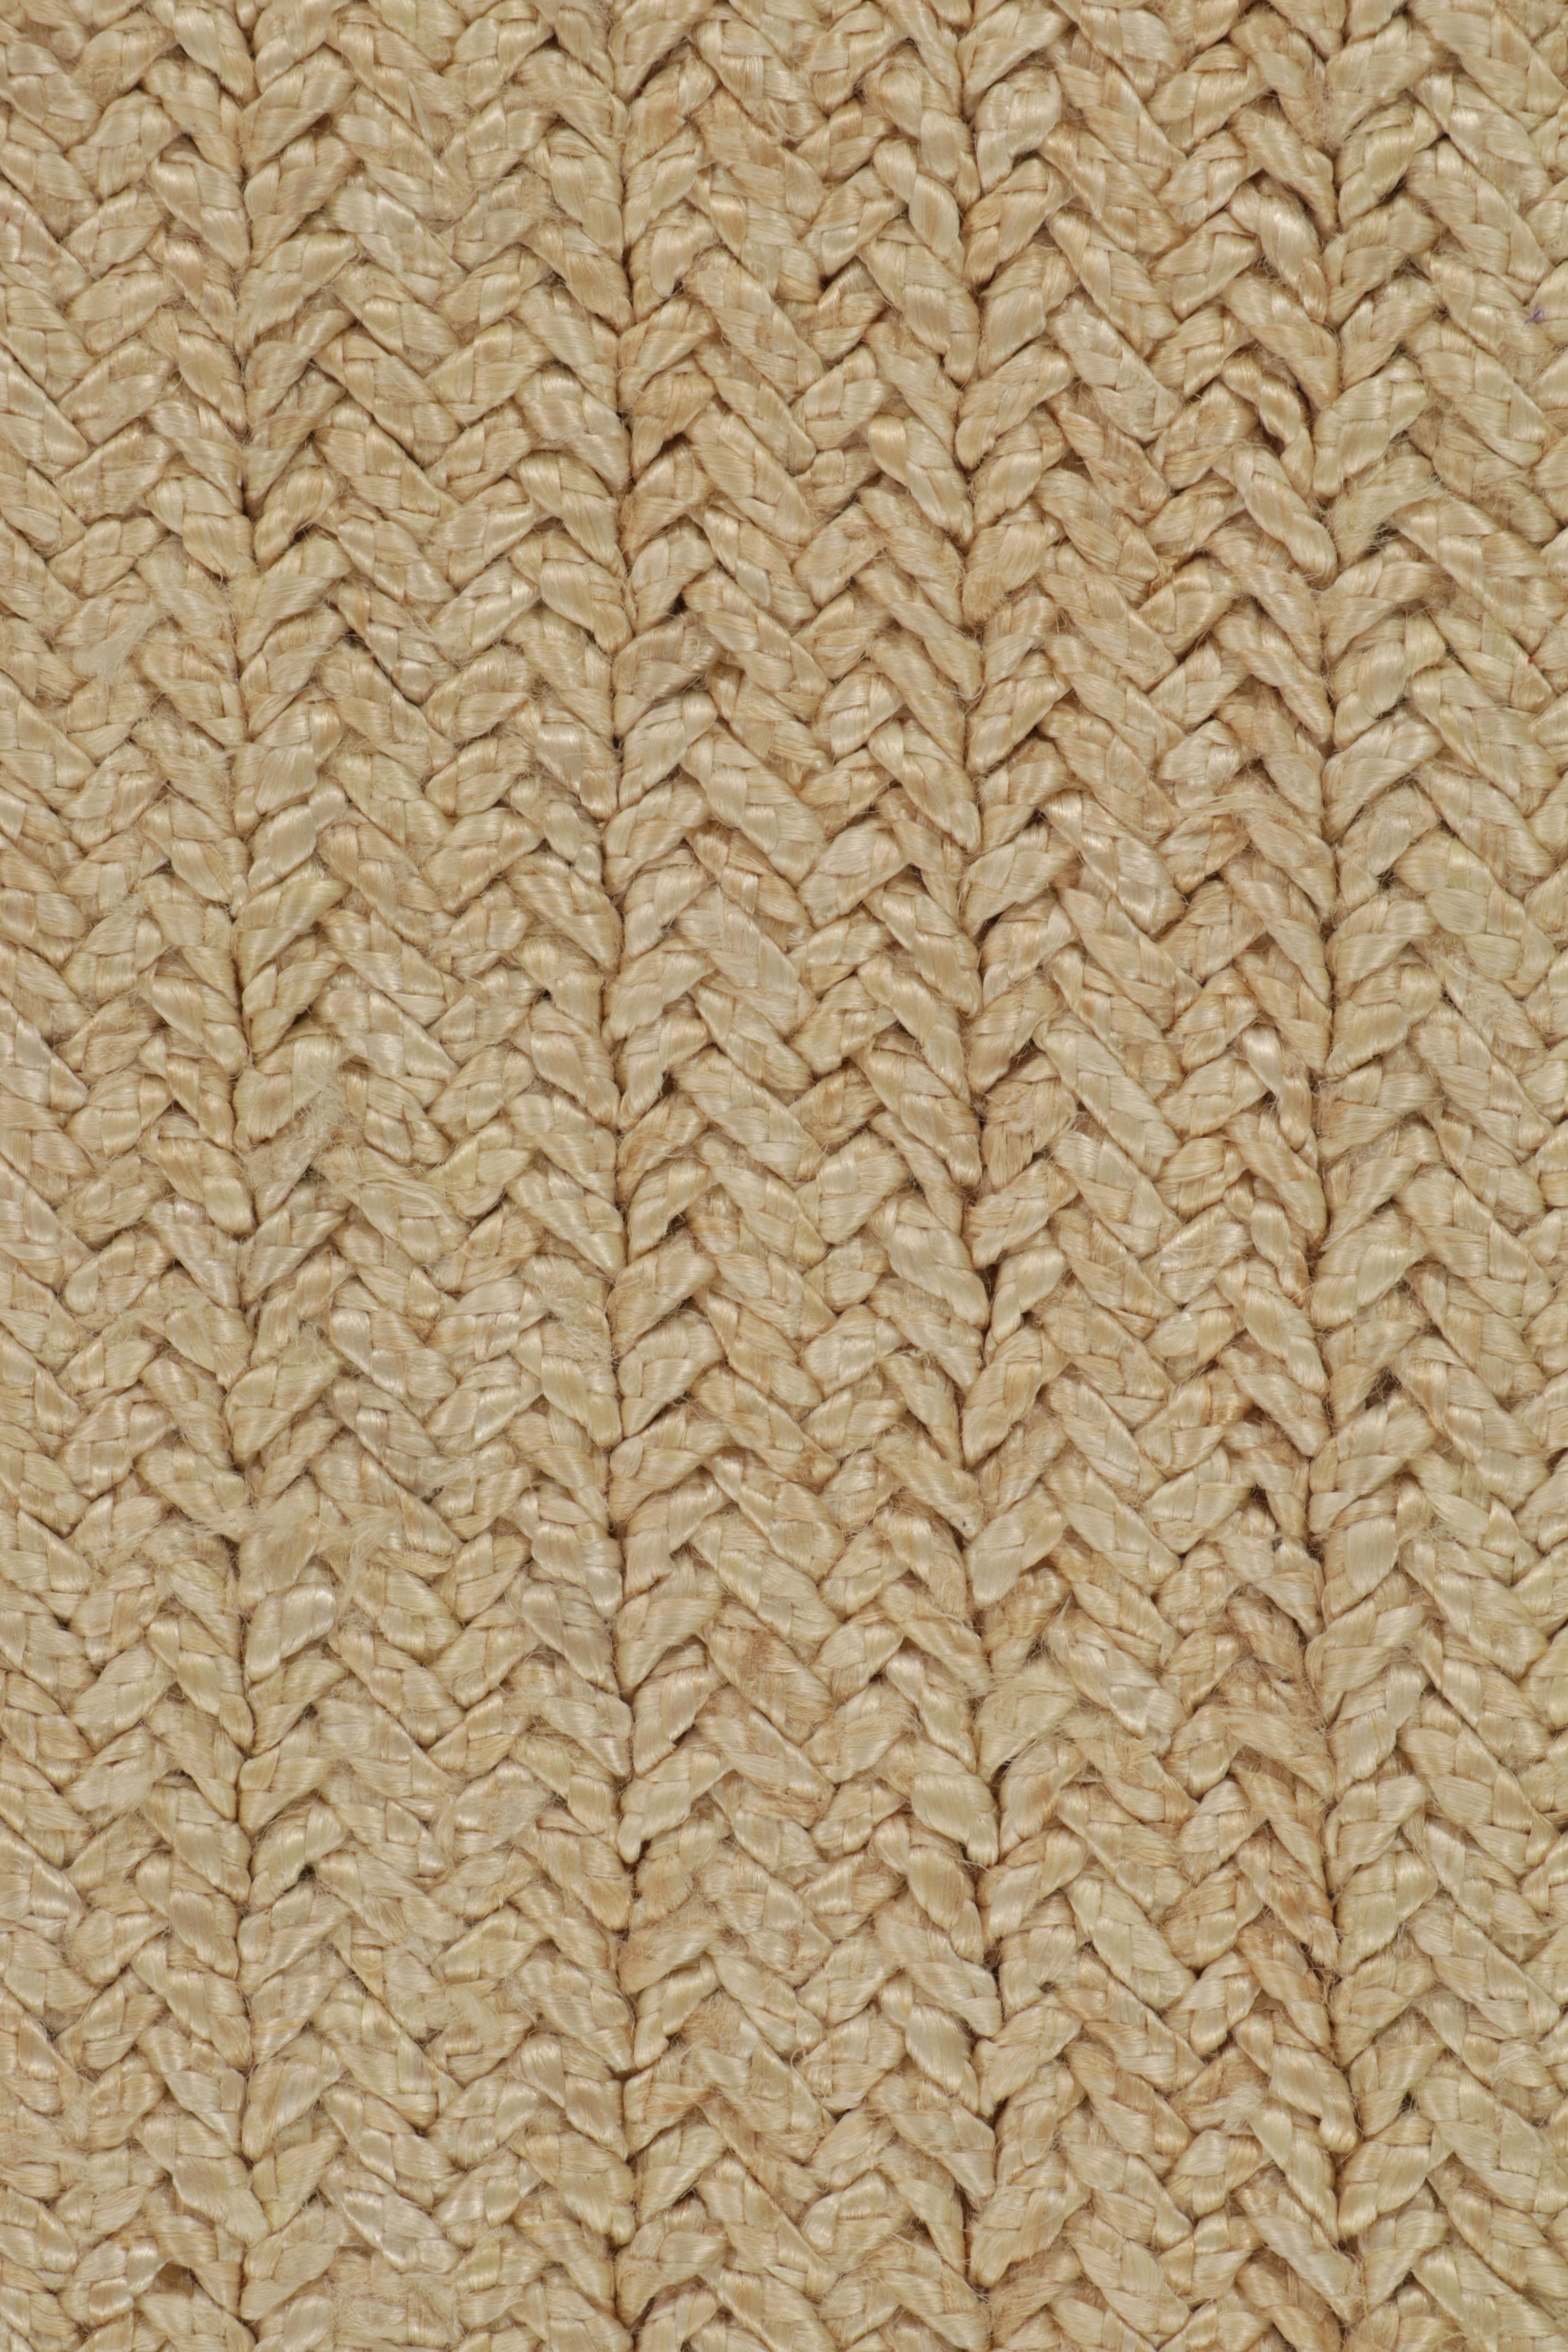 Rug & Kilim's Contemporary Jute & Sisal Runner in Beige-Brown In New Condition For Sale In Long Island City, NY